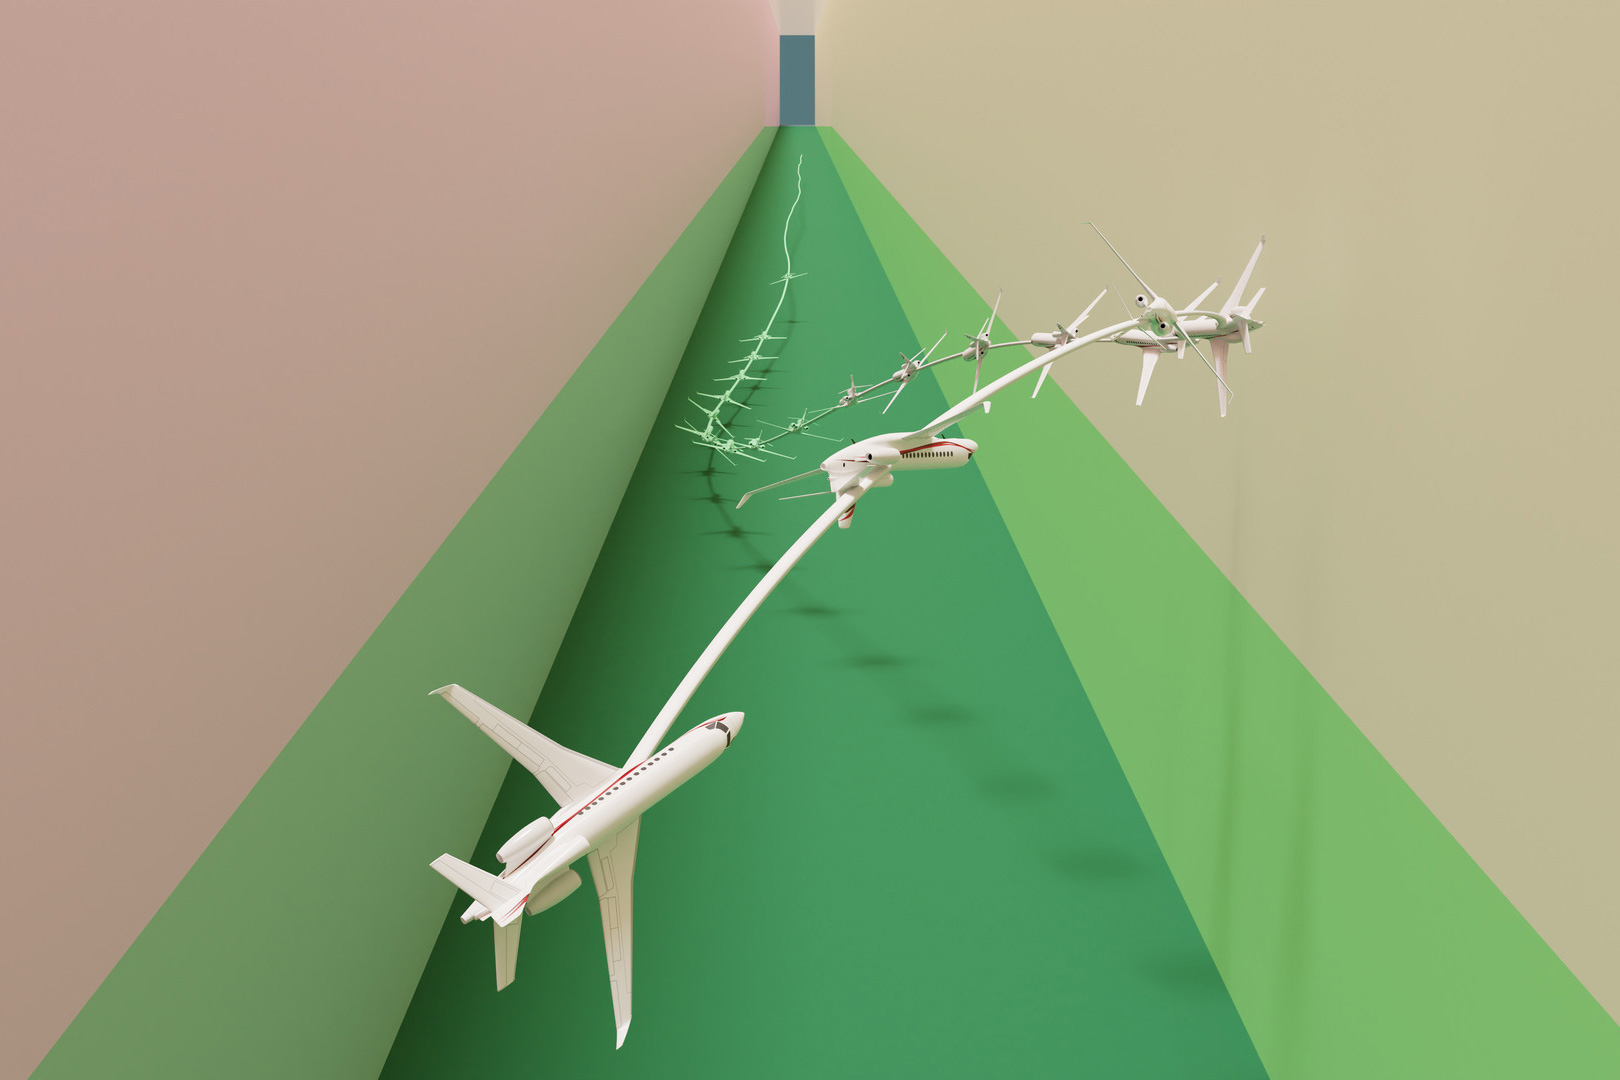 MIT researchers developed a machine-learning technique that can autonomously drive a car or fly a plane through a very difficult “stabilize-avoid” scenario, in which the vehicle must stabilize its trajectory to arrive at and stay within some goal region, while avoiding obstacles.